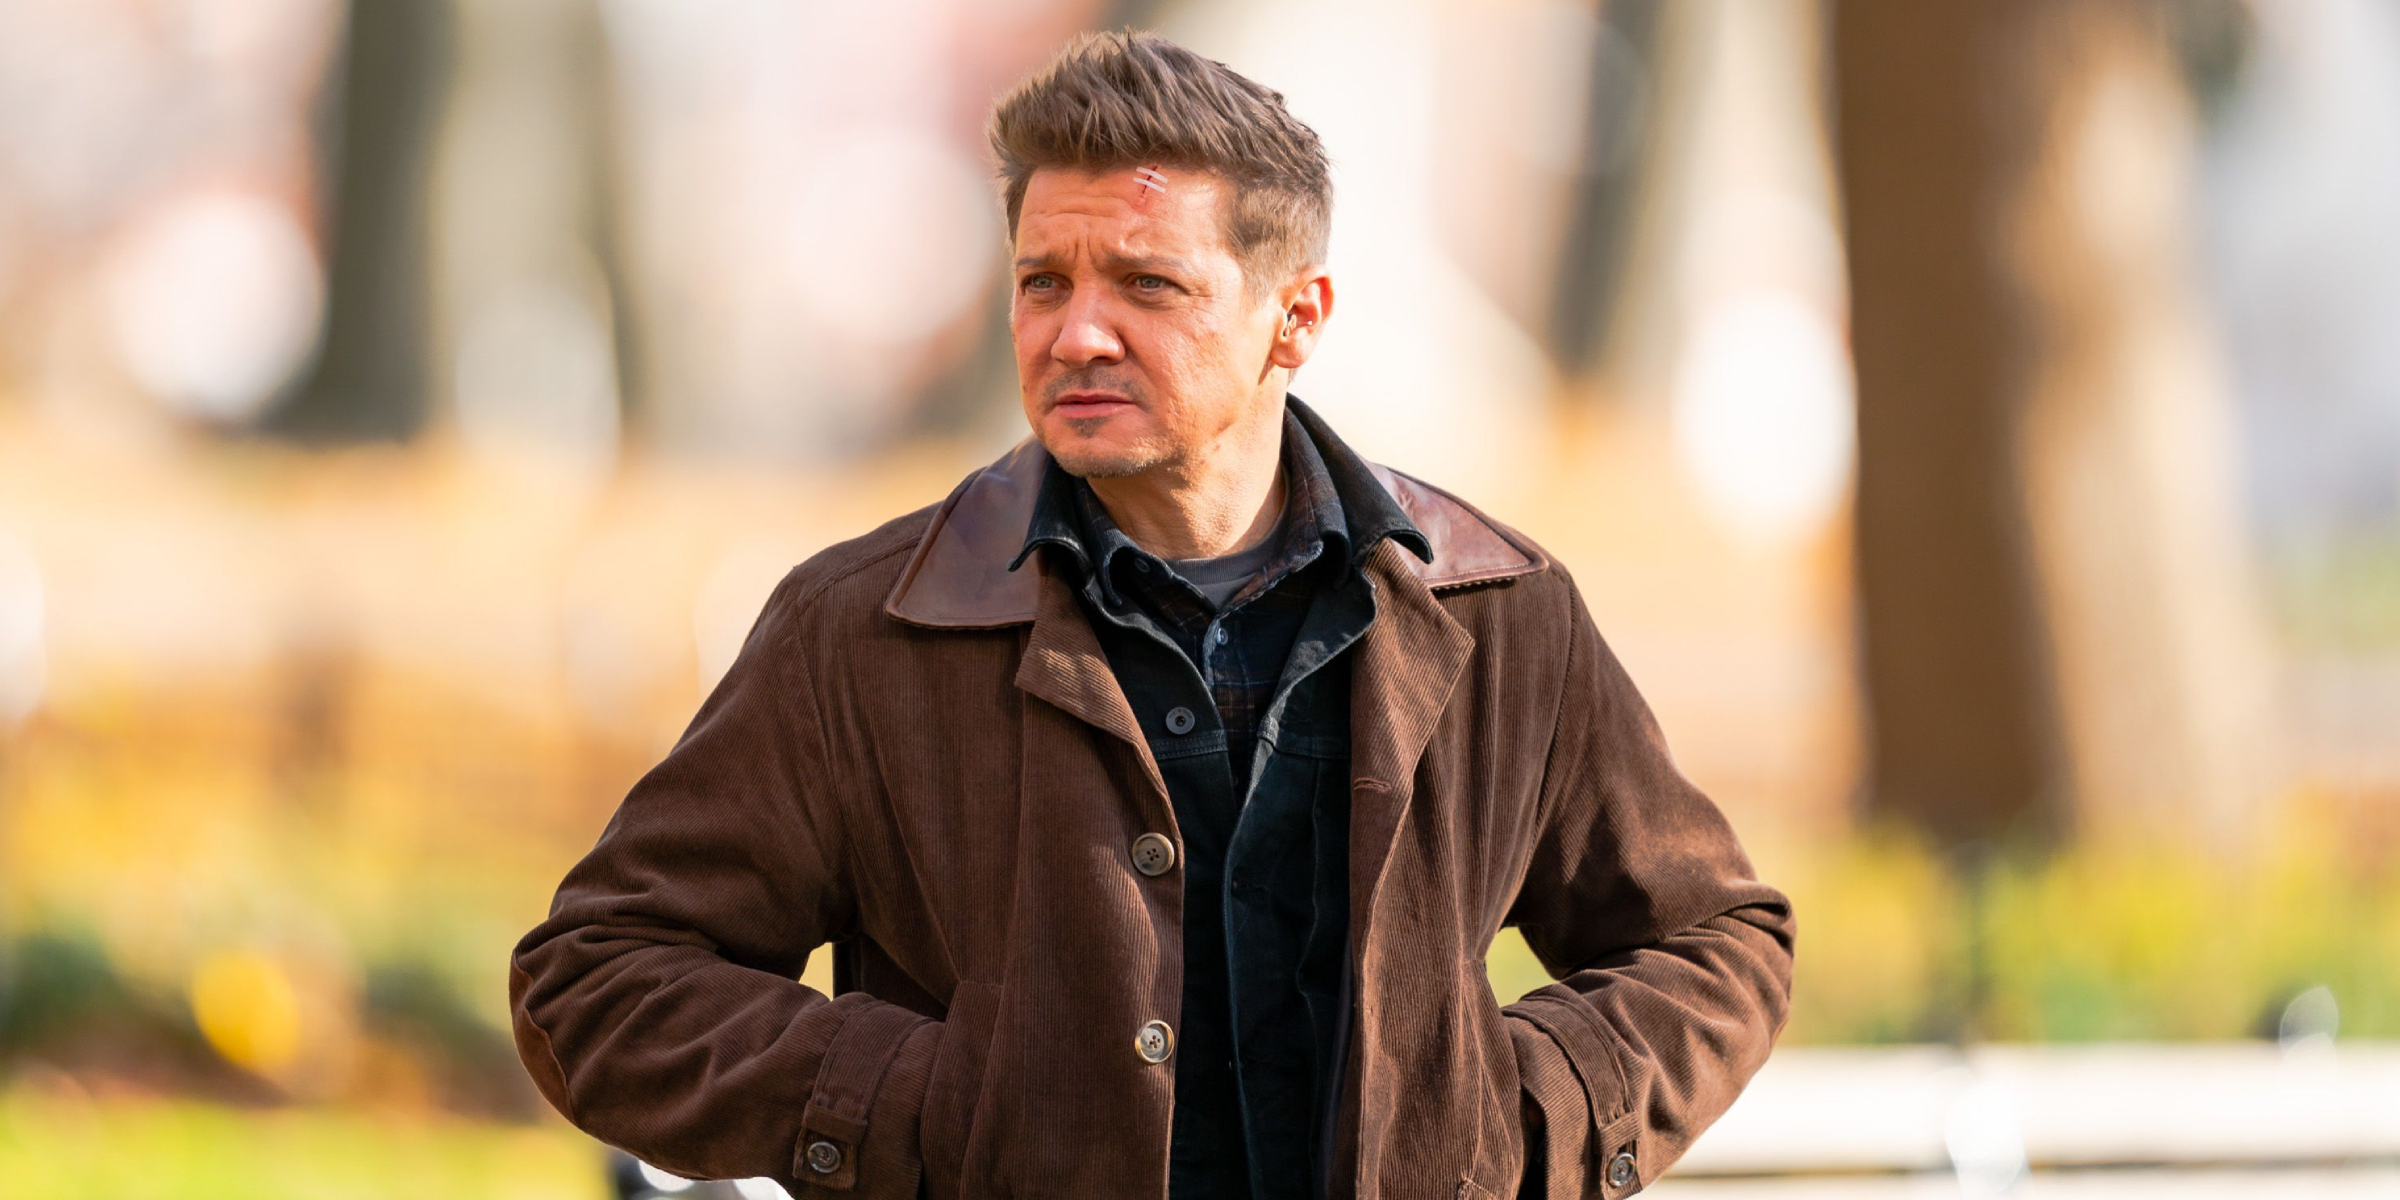 Jeremy Renner | Source: Getty Images